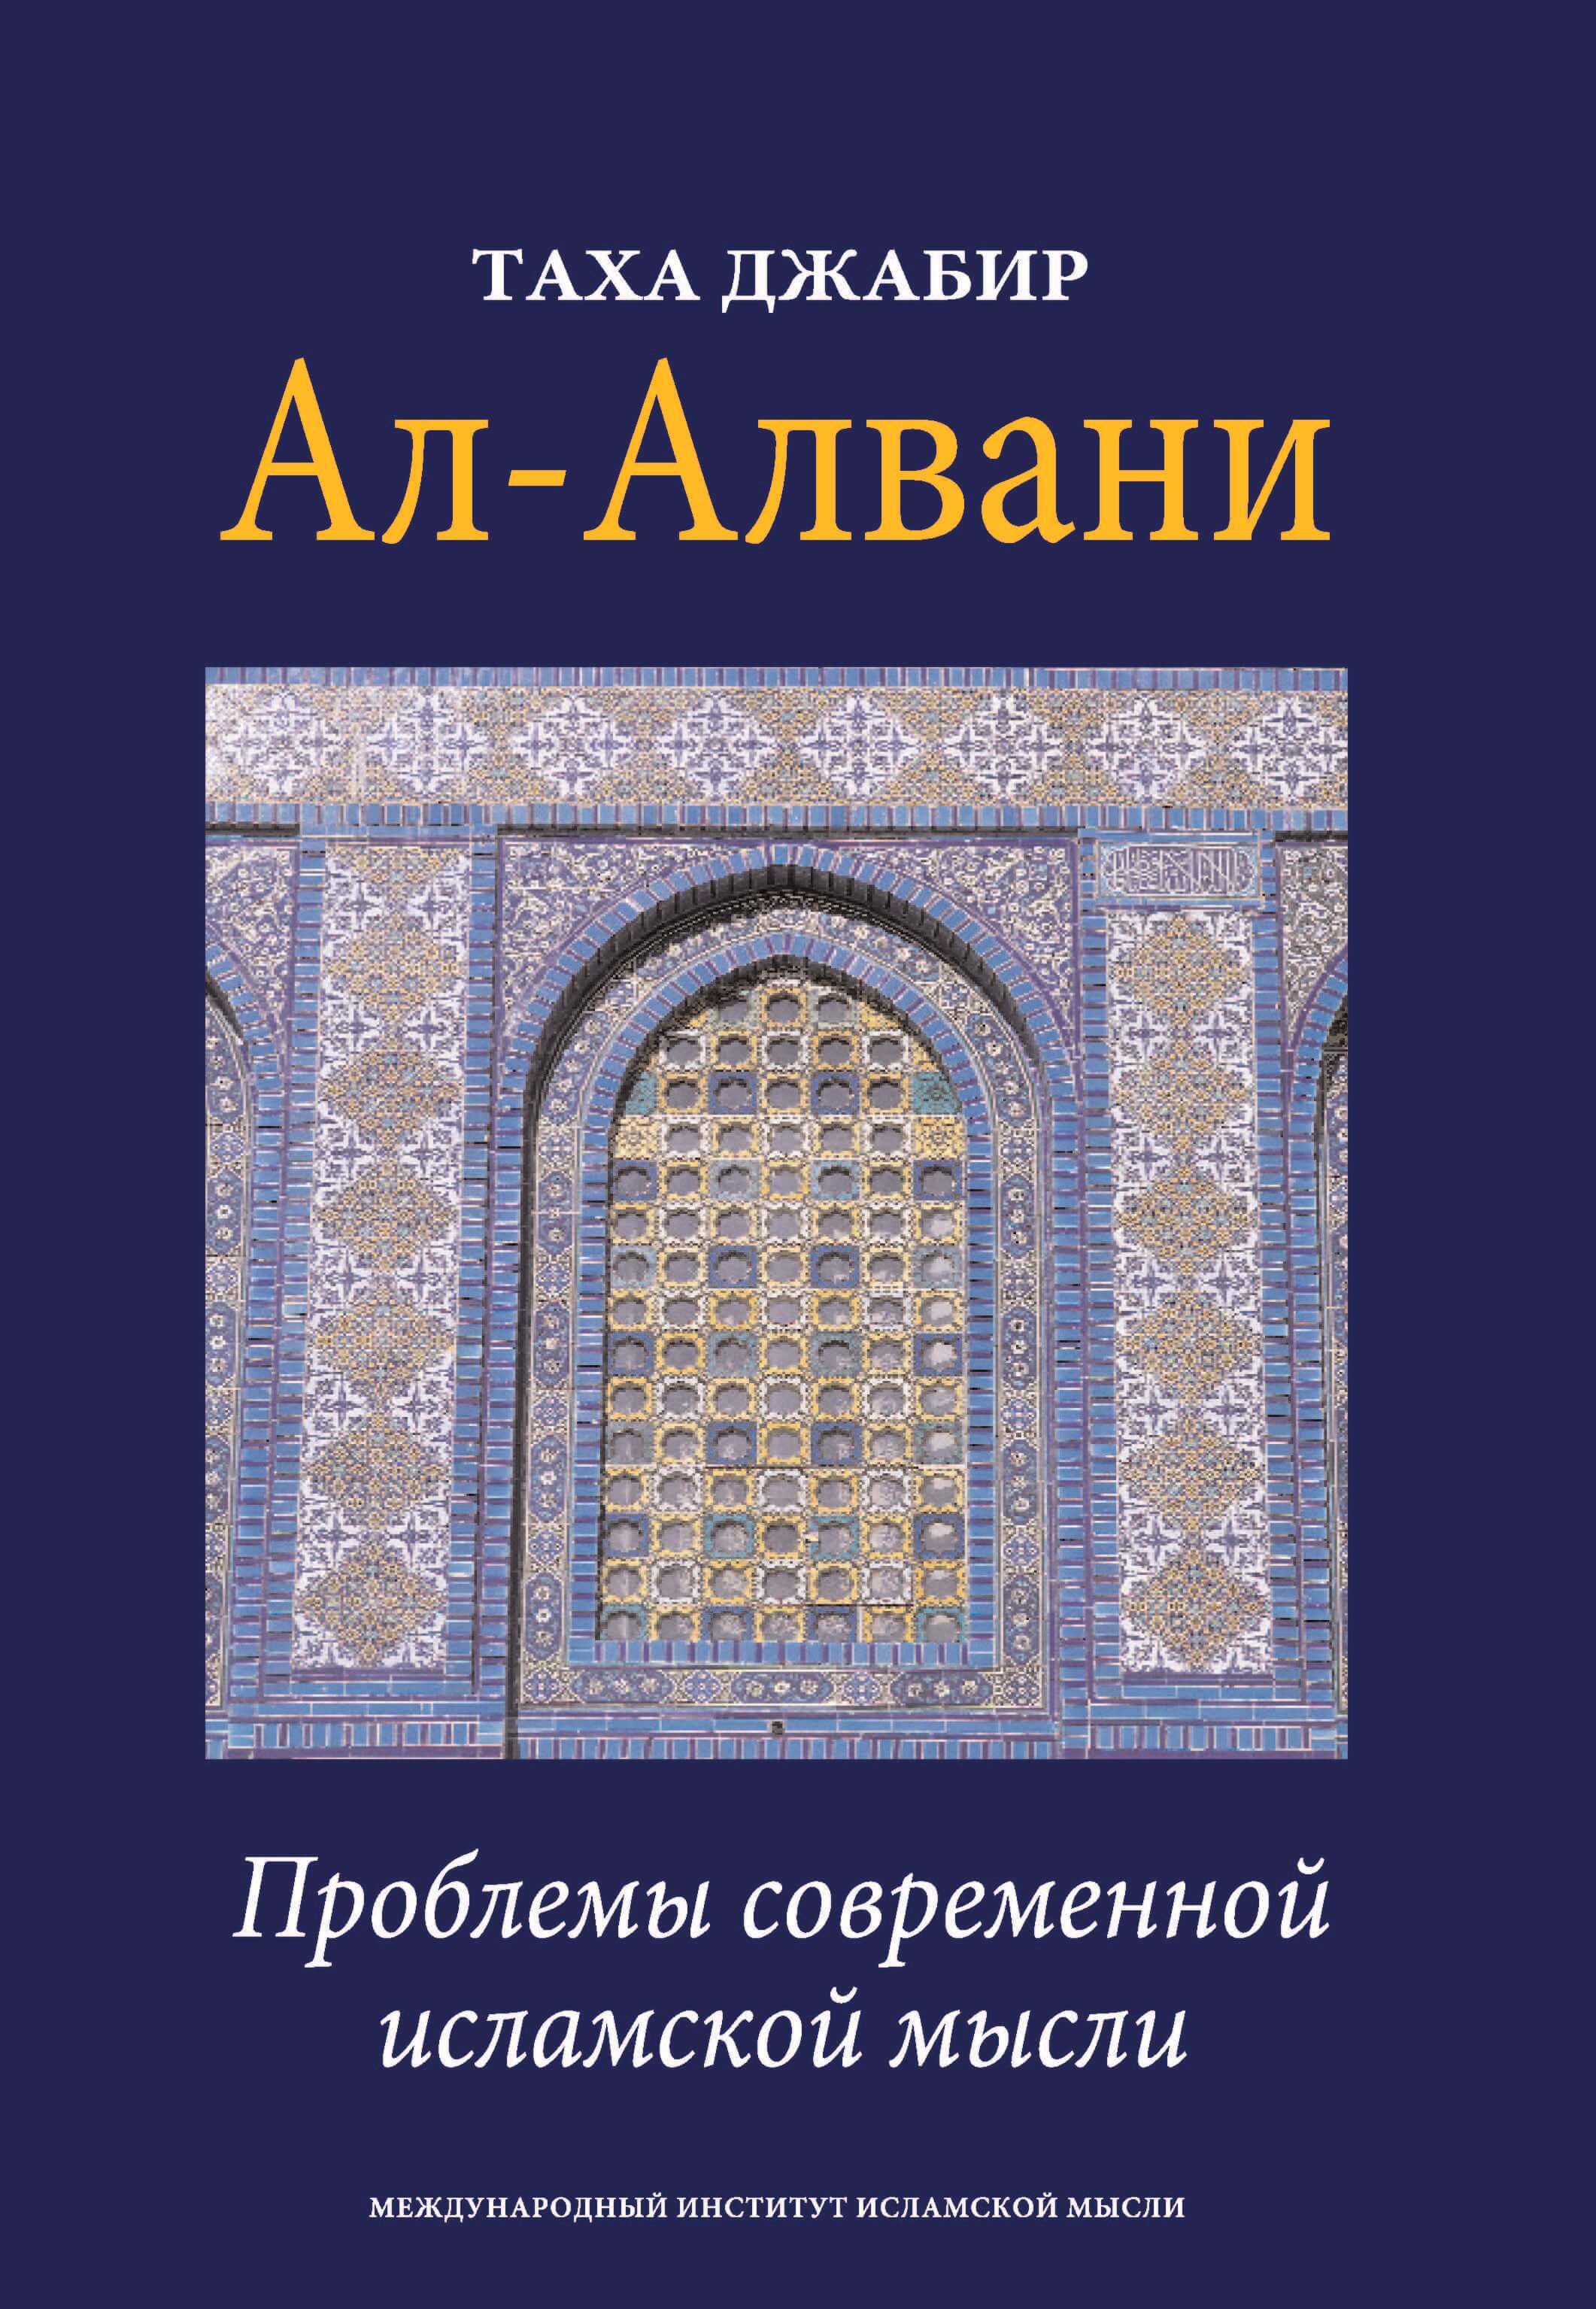 Russian: Таха Джабир ал-Алвани (Issues in Contemporary Islamic Thought)